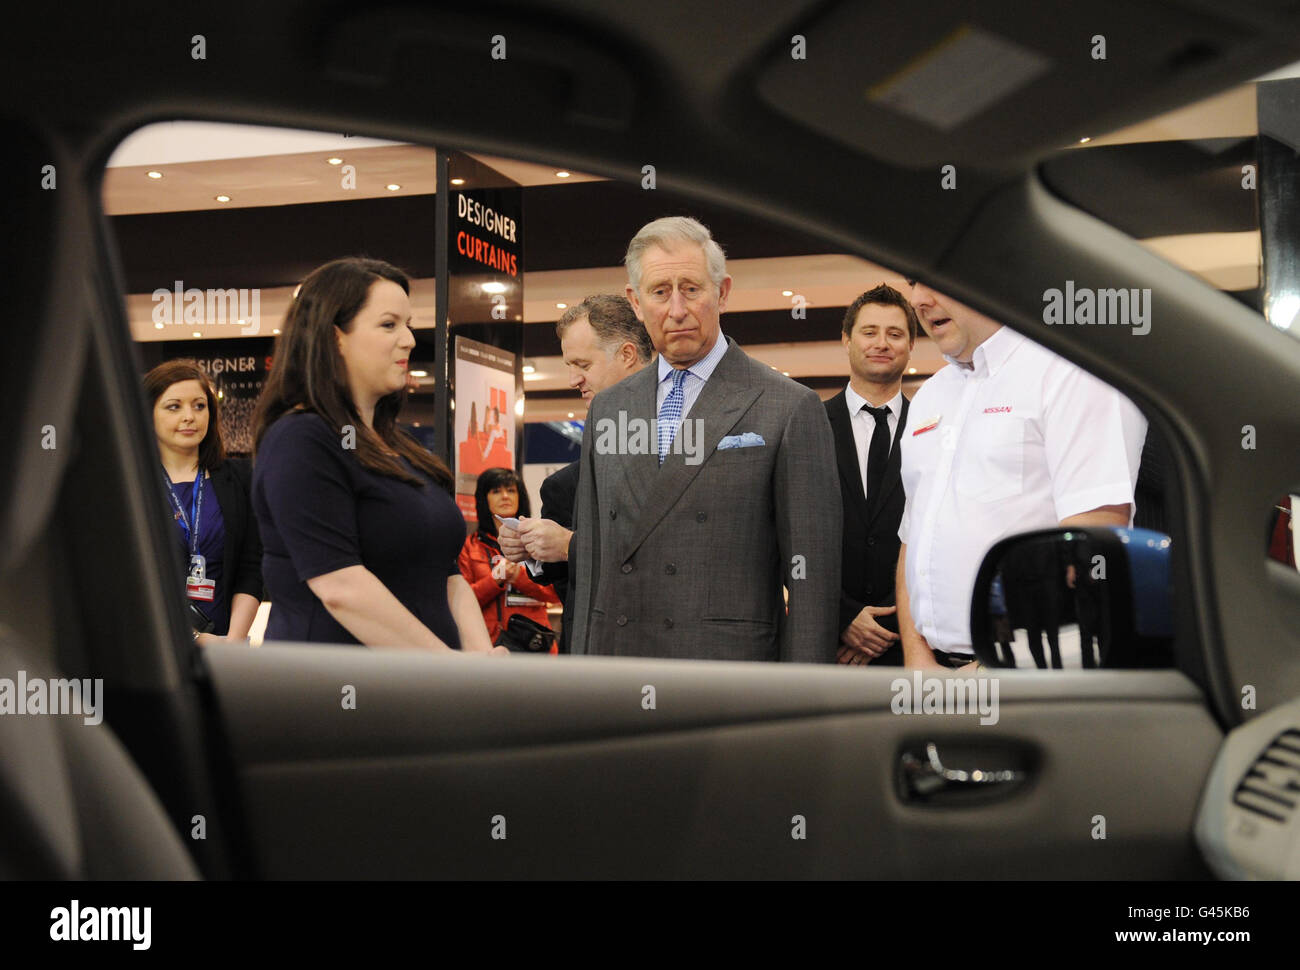 The Prince of Wales visits the Ideal Home Show Stock Photo